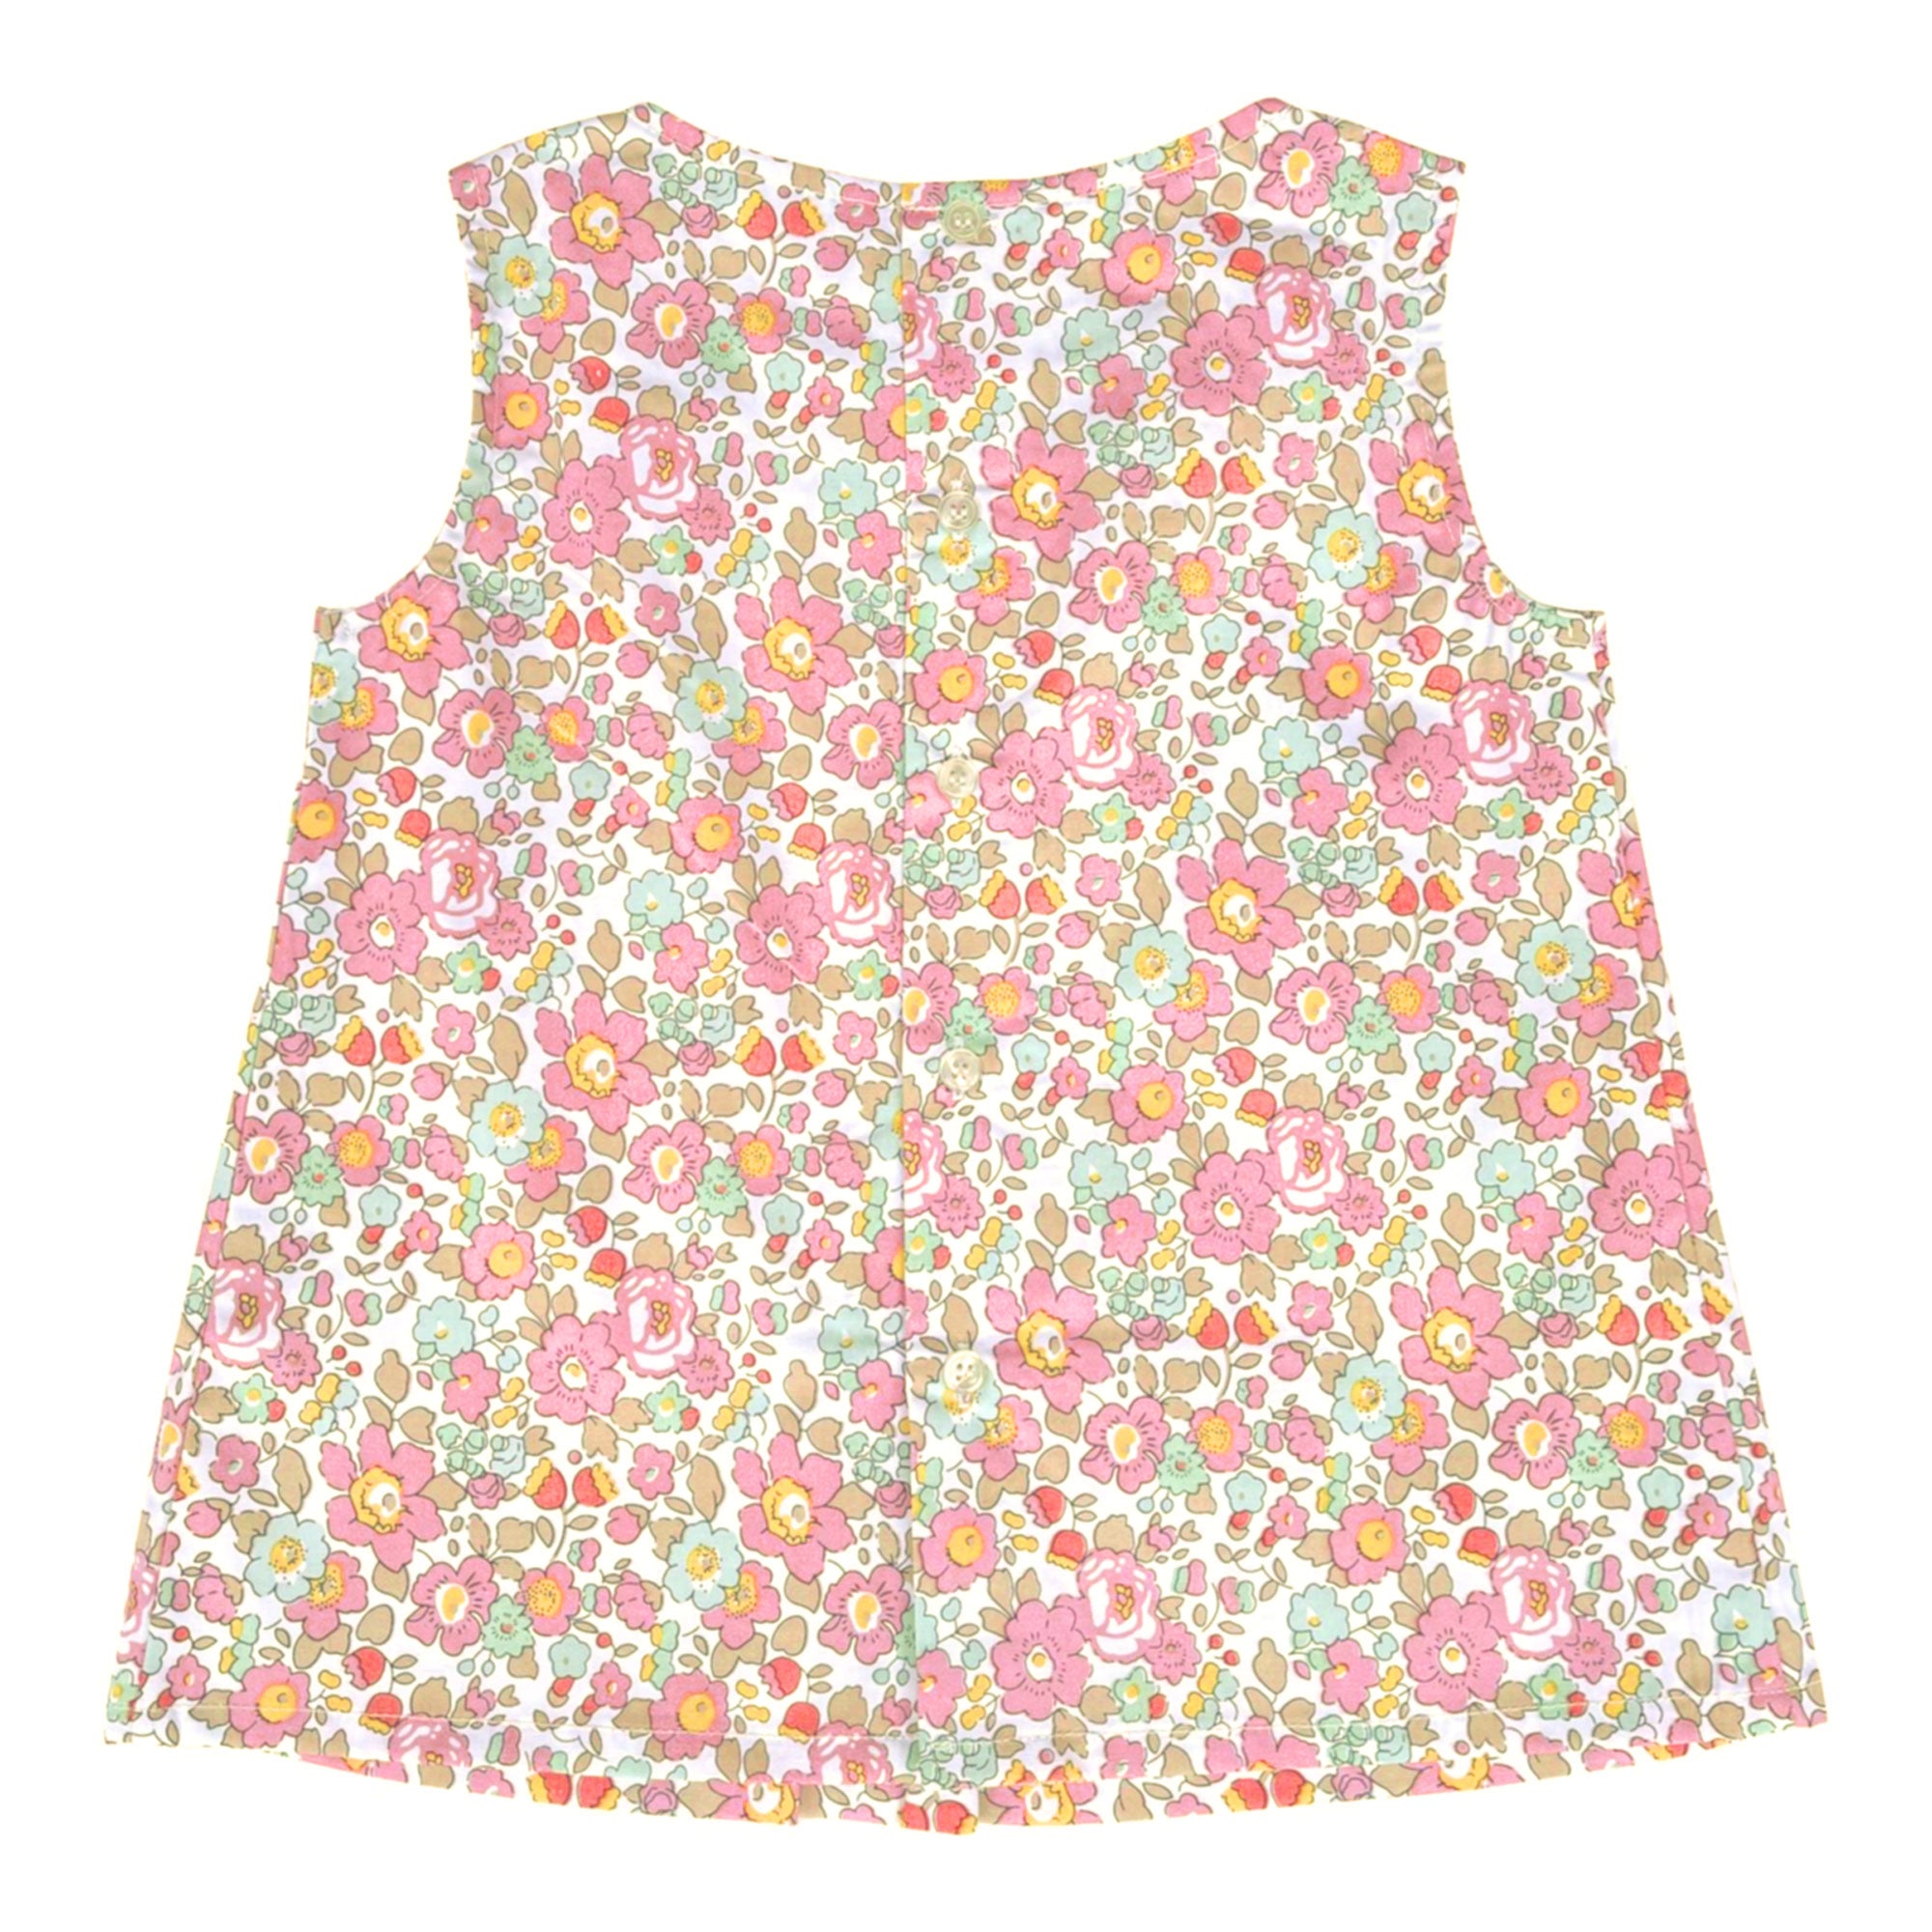 Florrie Tunic Top In Pale Pink Liberty Print - Cou Cou Baby